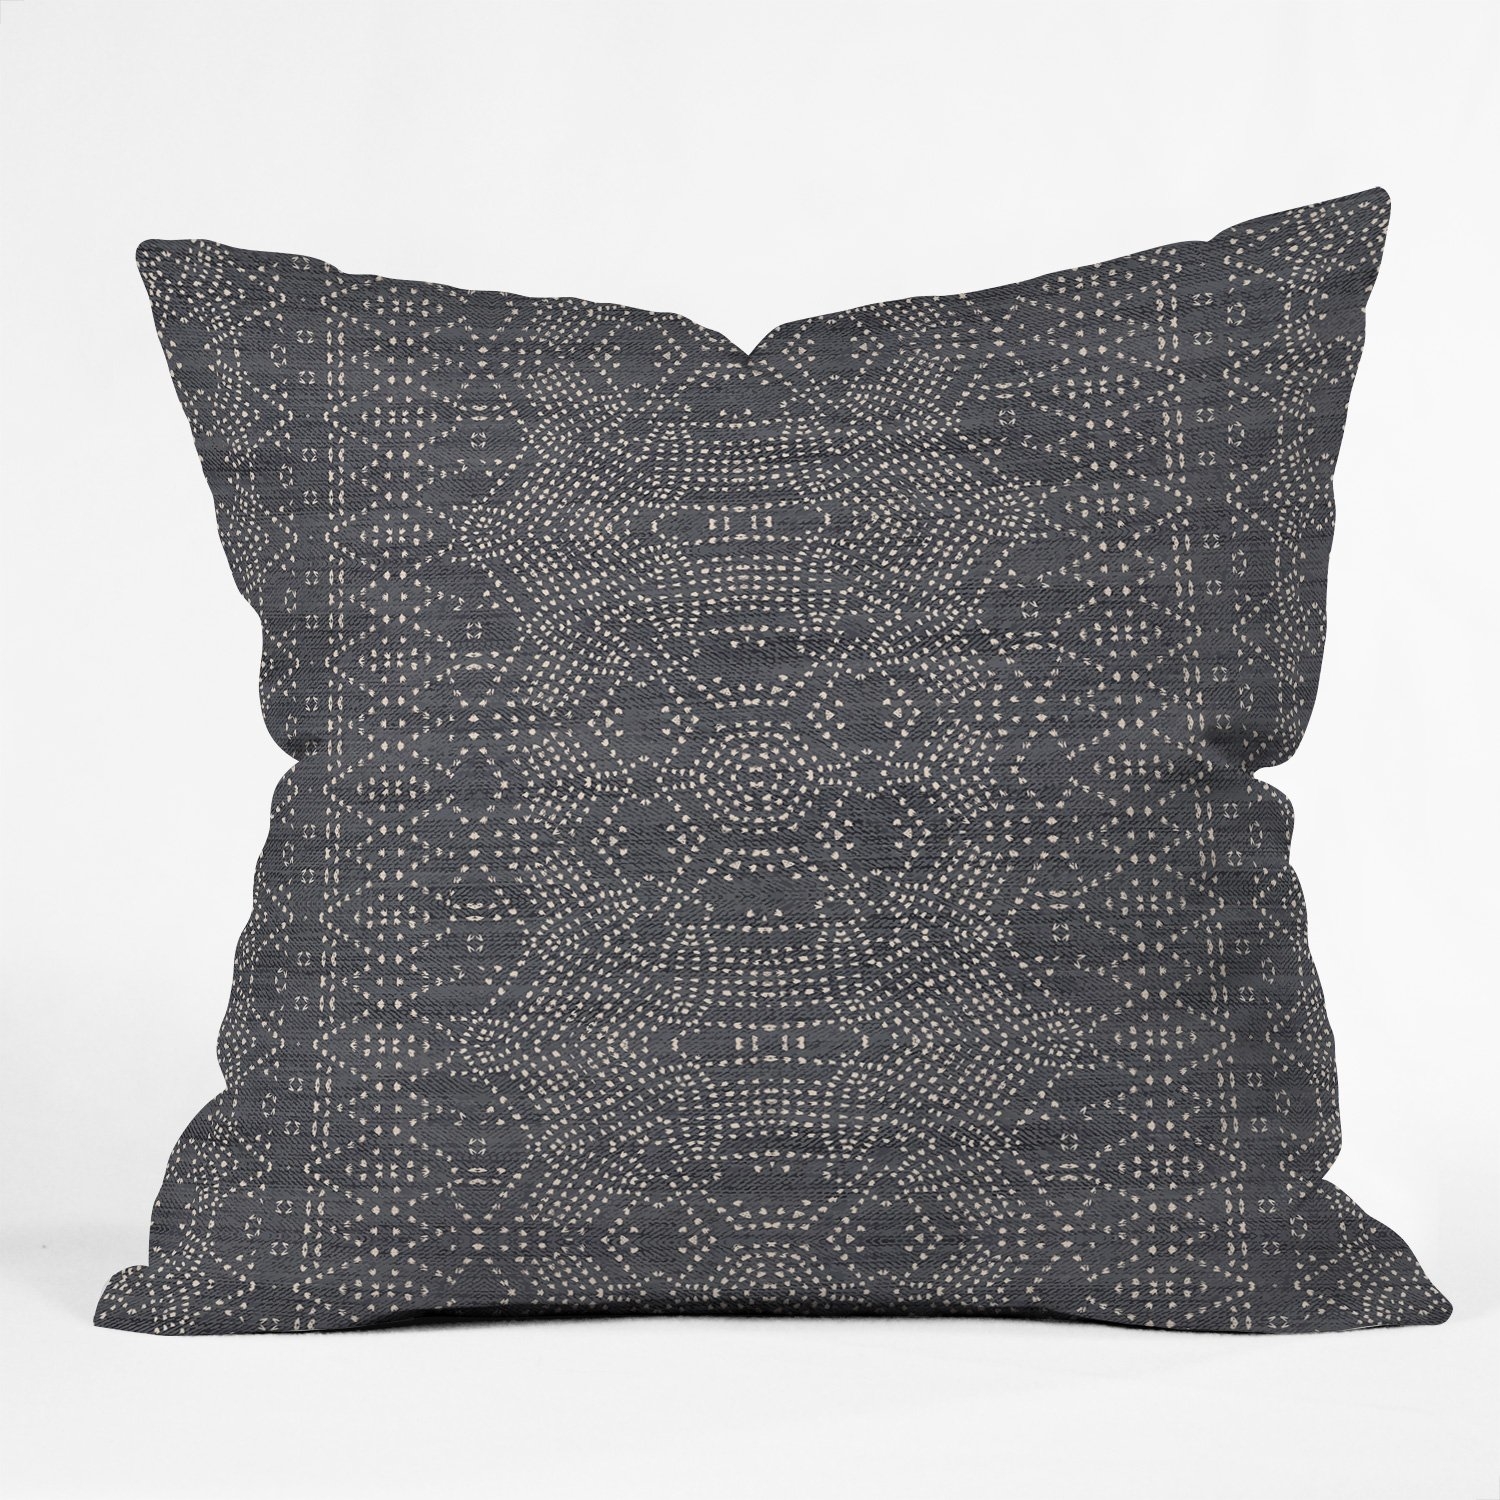 THROW PILLOW -  MARRAKESHI DENIM  BY HOLLI ZOLLINGER - 20" x 20" - polyester insert included - Image 0